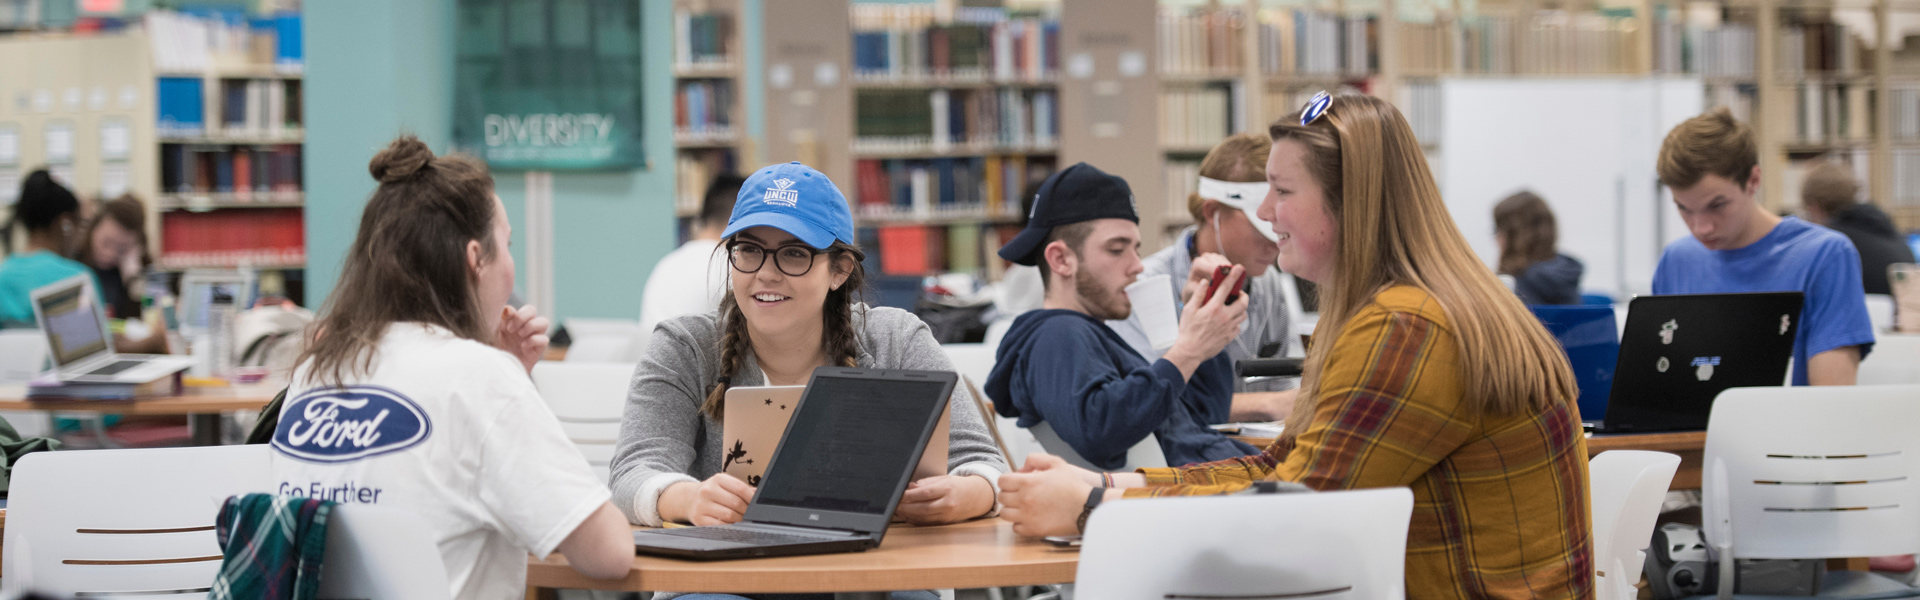 Students sit at table in library while studying on their laptops